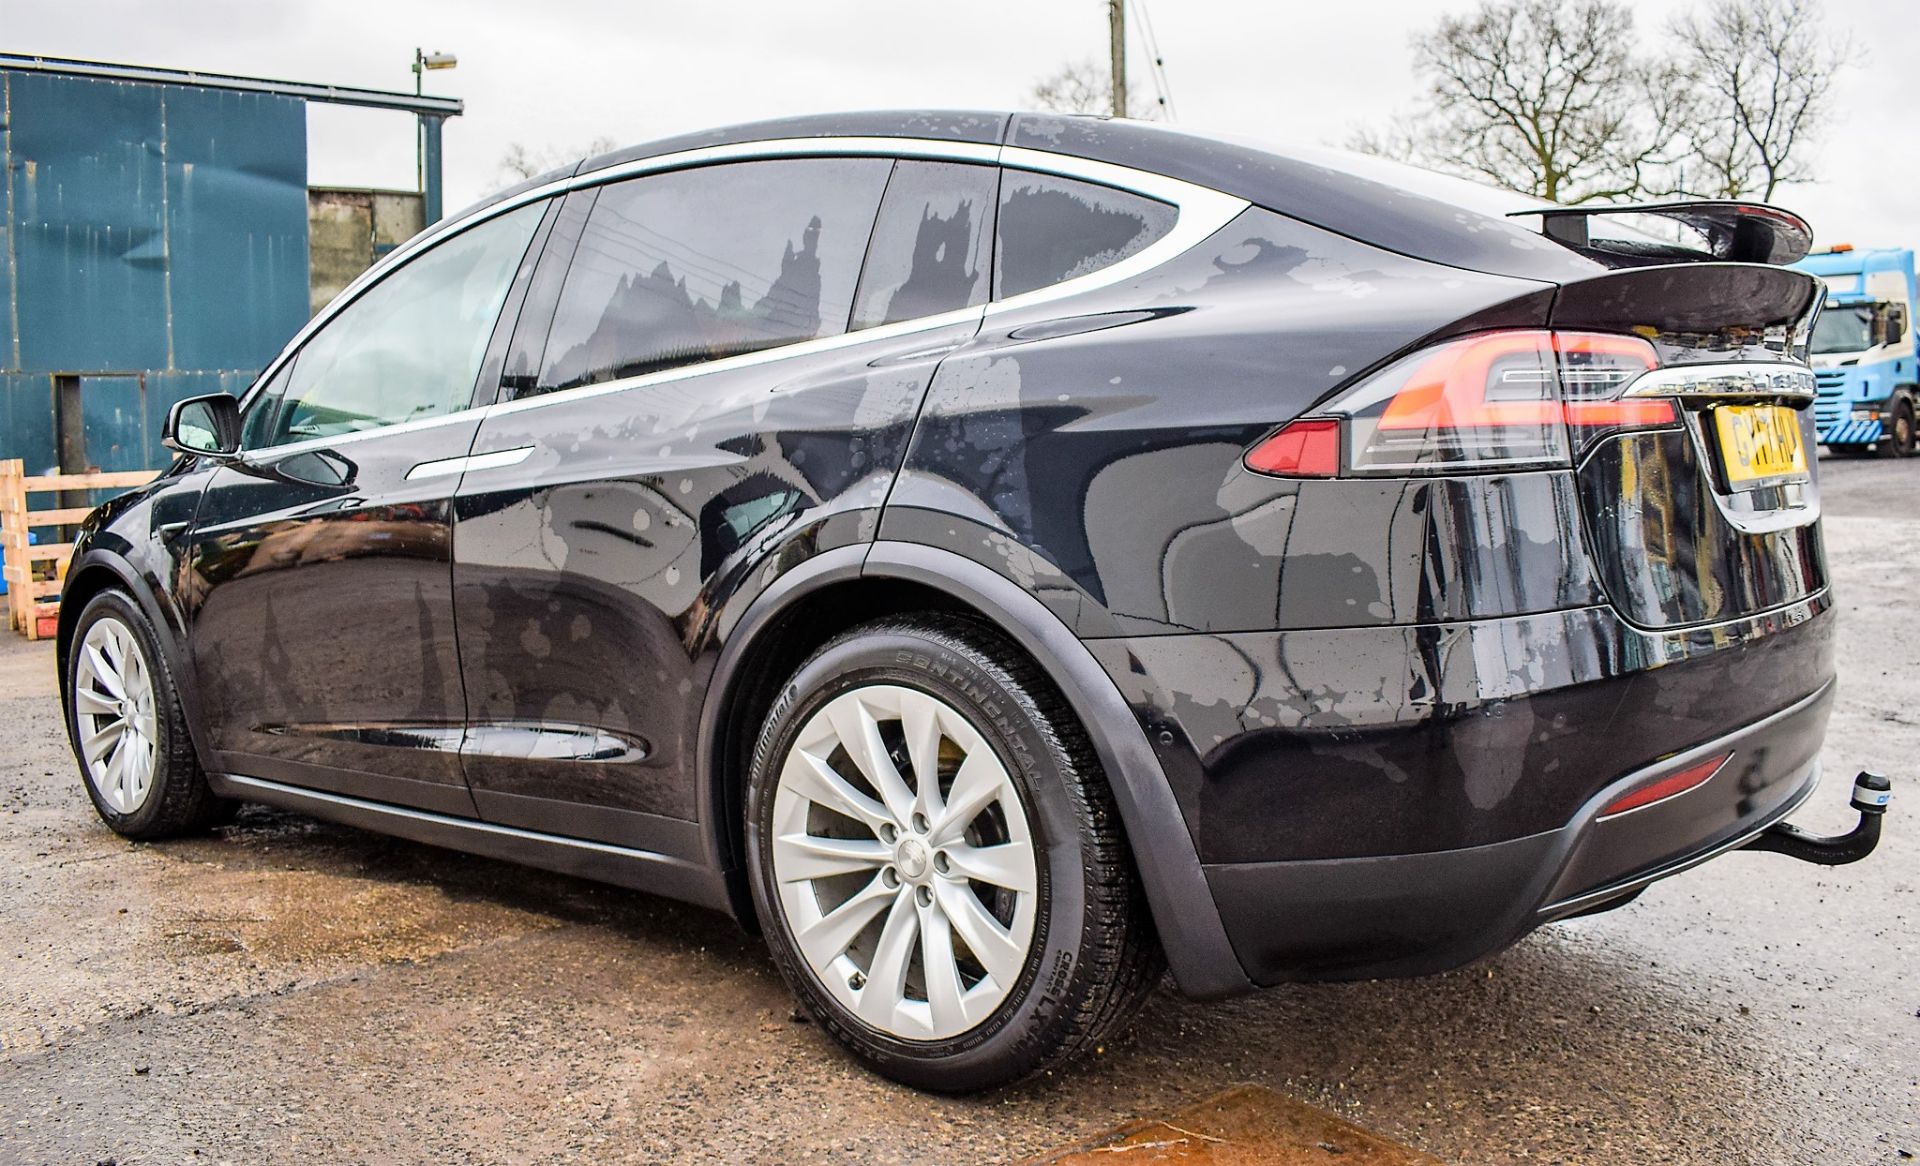 Tesla Model X 90 D dual motor 7 seat battery electric SUV Registration Number: GY17 HLM Date of - Image 3 of 14